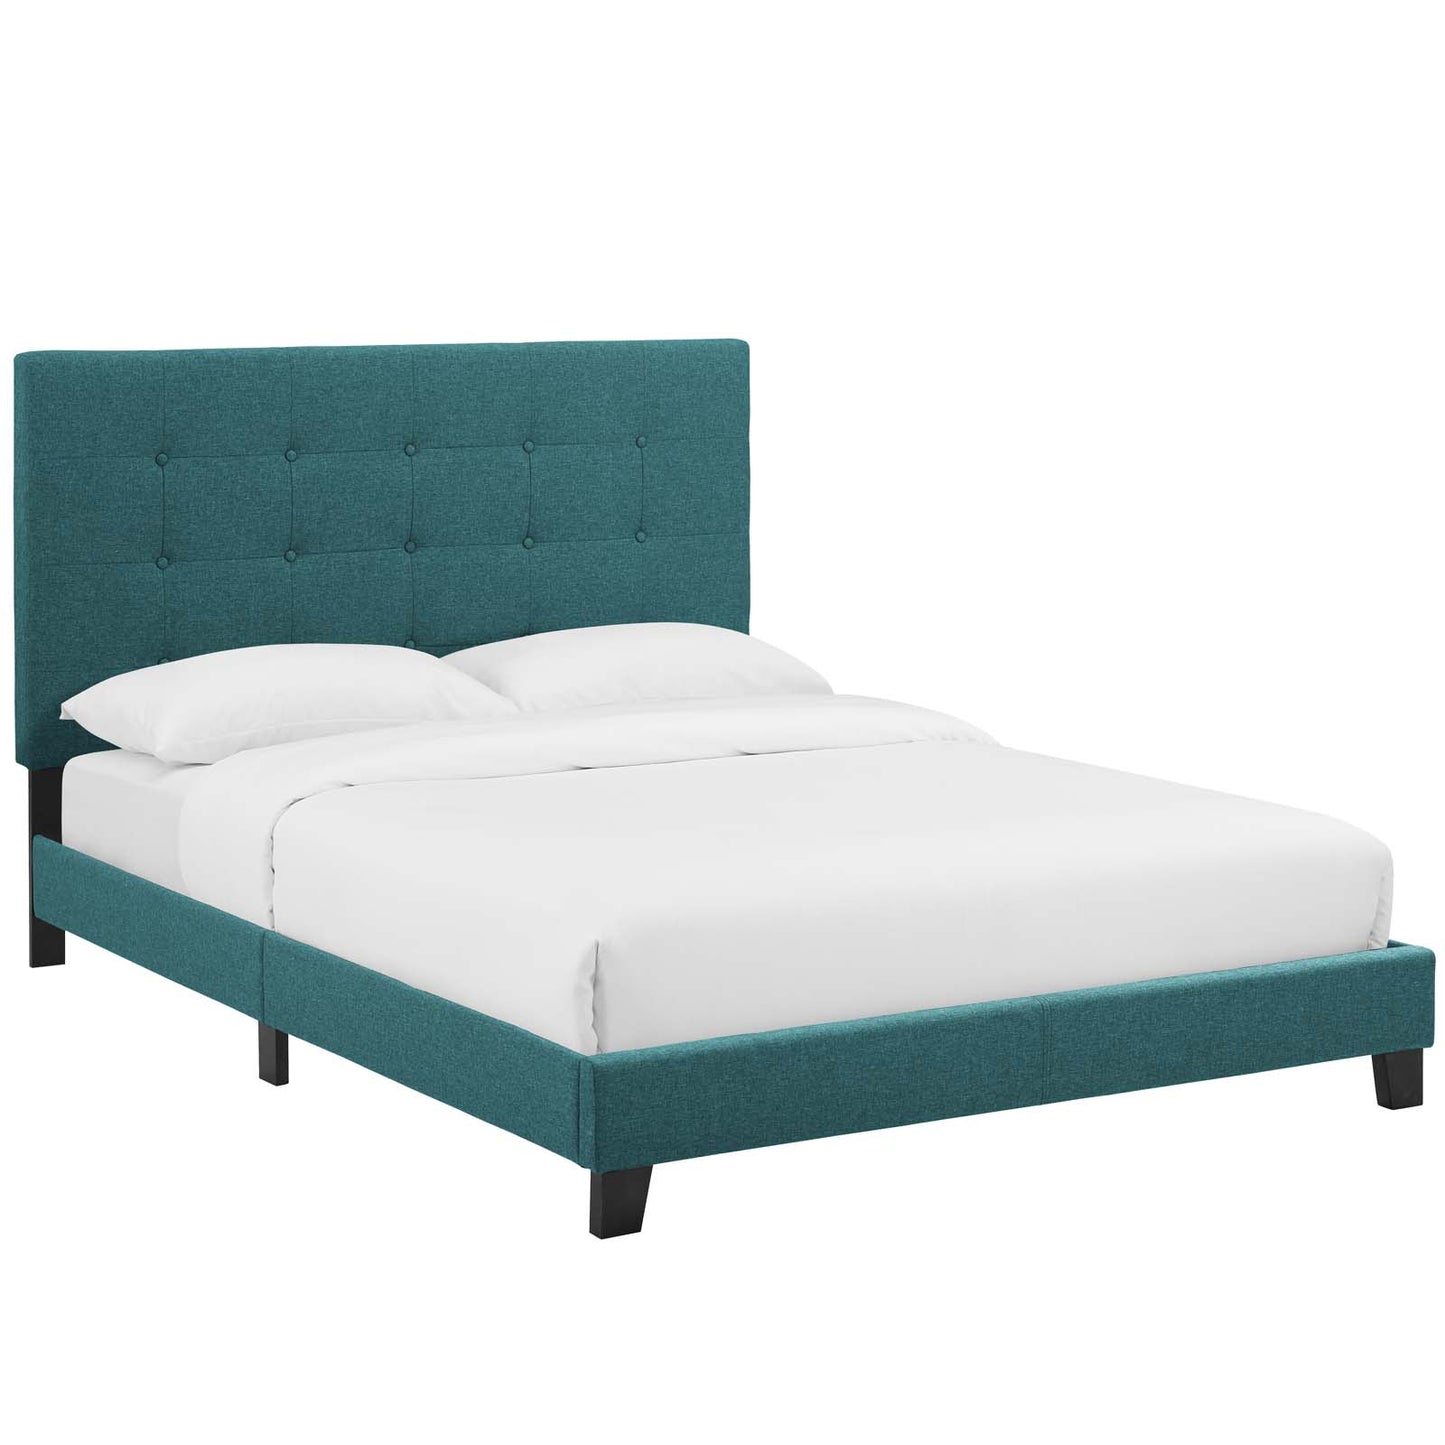 Melanie Twin Tufted Button Upholstered Fabric Platform Bed Teal MOD-5877-TEA